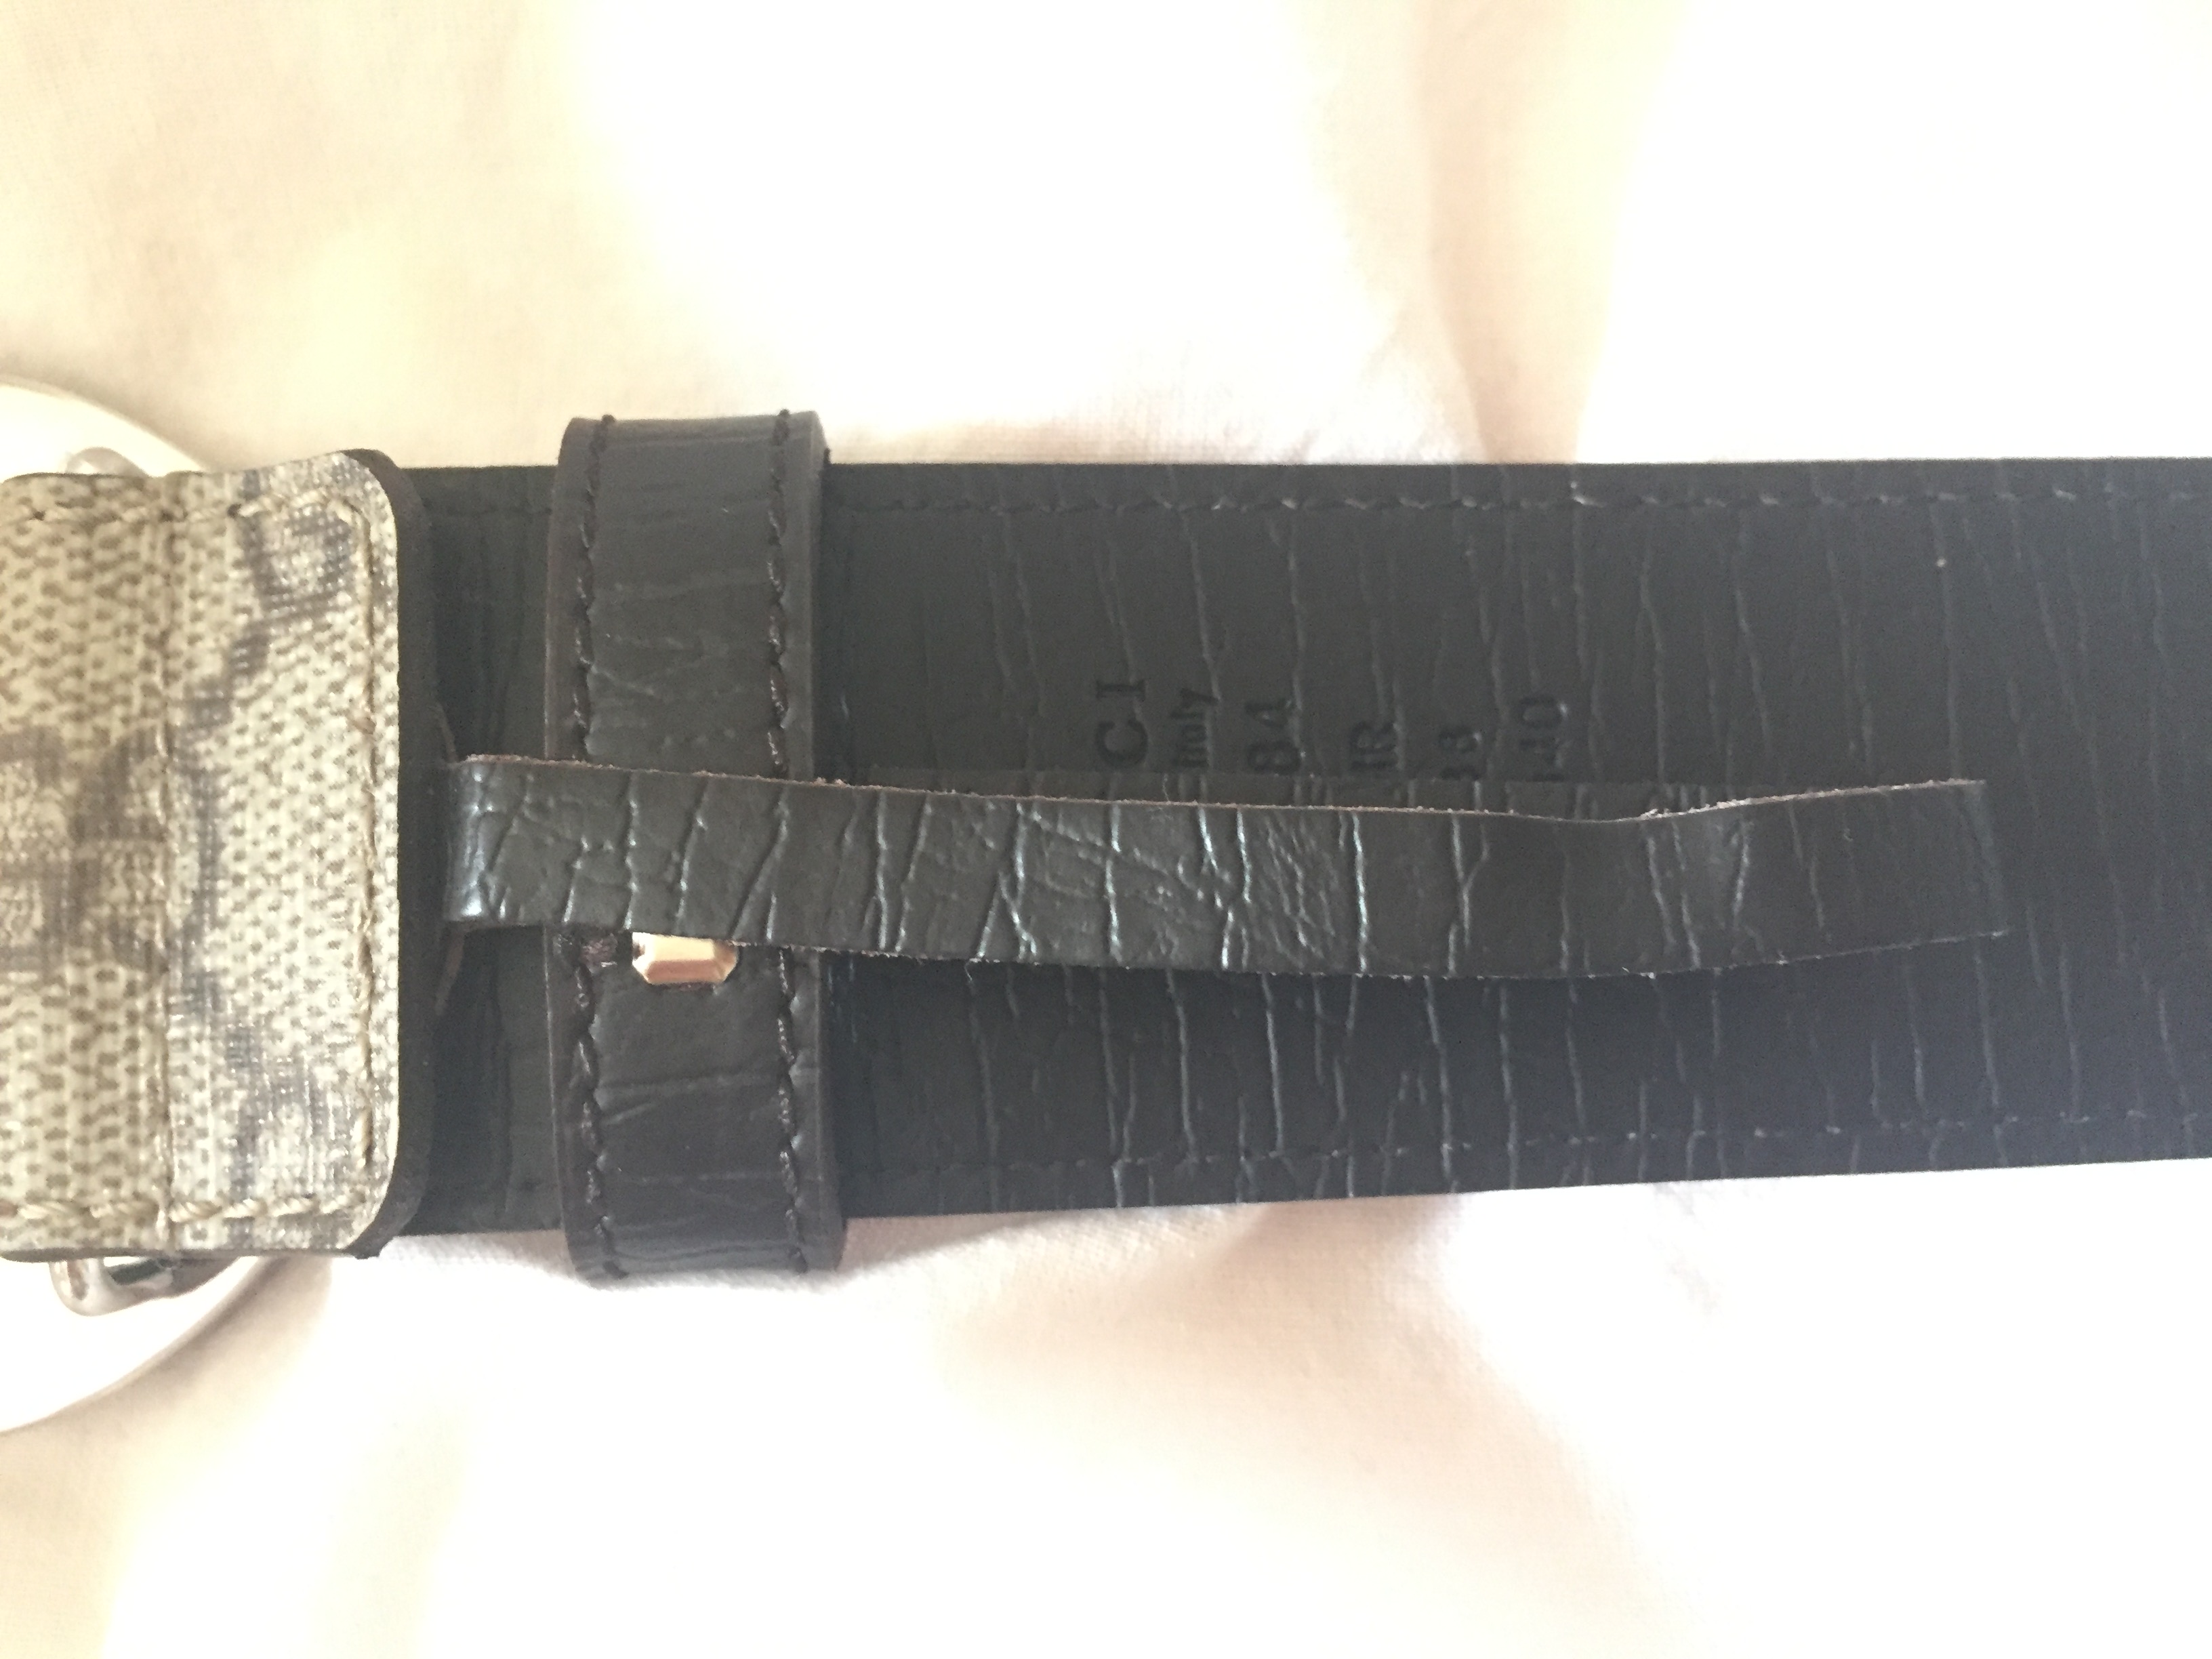 Gucci belt real or fake, please help! - The eBay Community